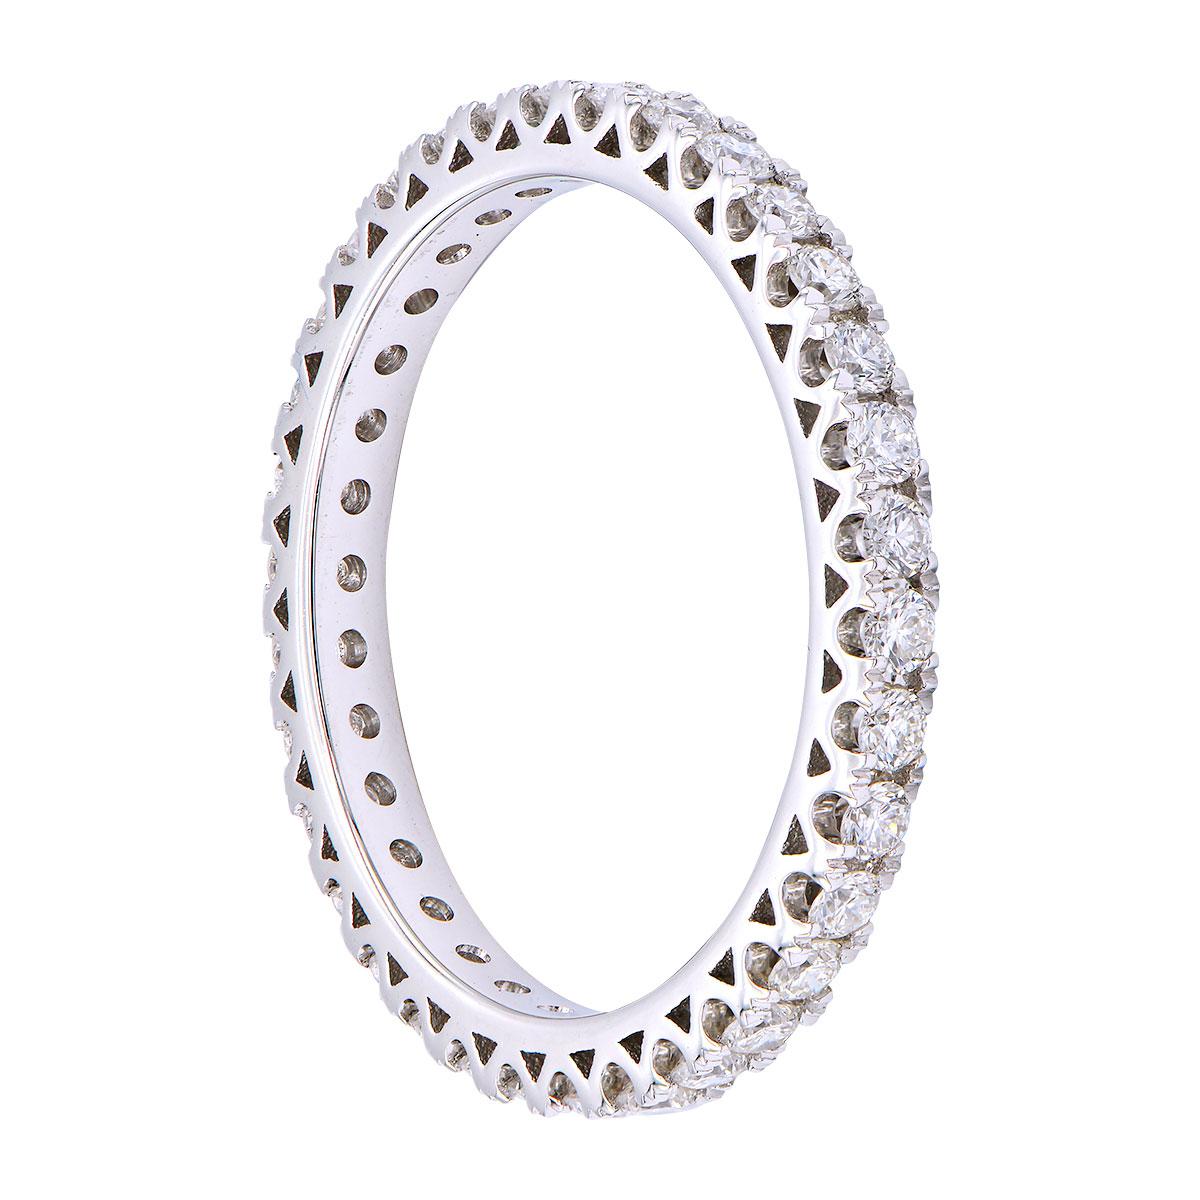 This gorgeous diamond eternity band has 35 round VS2, G color diamonds totaling 0.64 carats. They are set in 1.8 grams of 18 karat white gold. The gold prongs add a beautiful detail from the sides and it has a smooth comfortable fit. This ring is